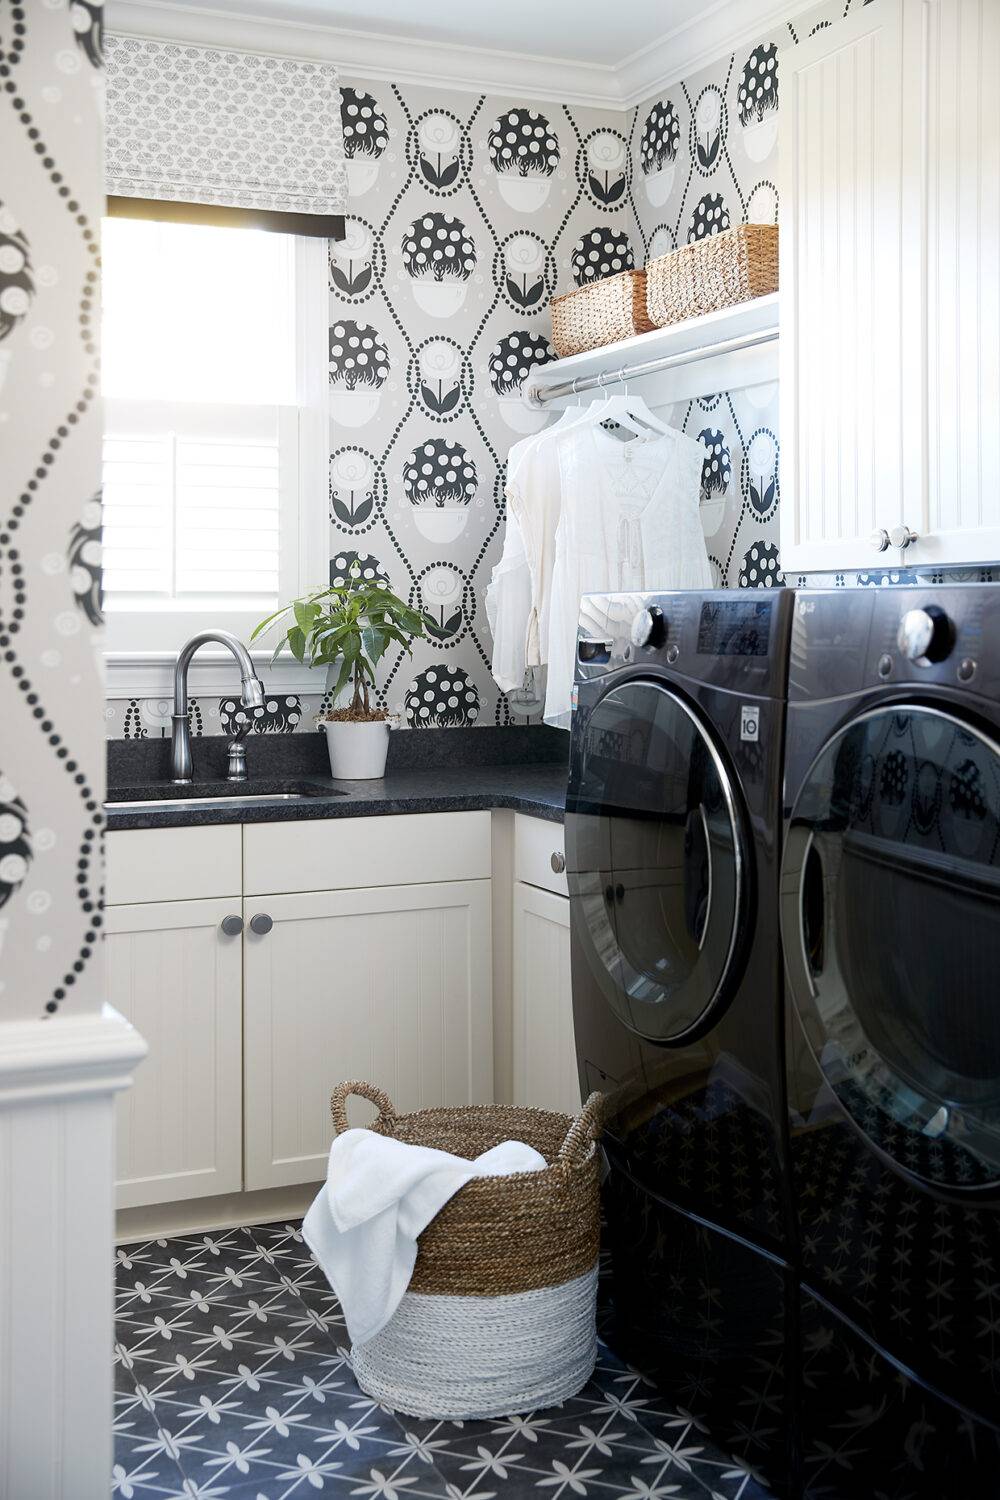 Laundry room with black and white patterned wallpaper and black with white star shapes tile floor. 